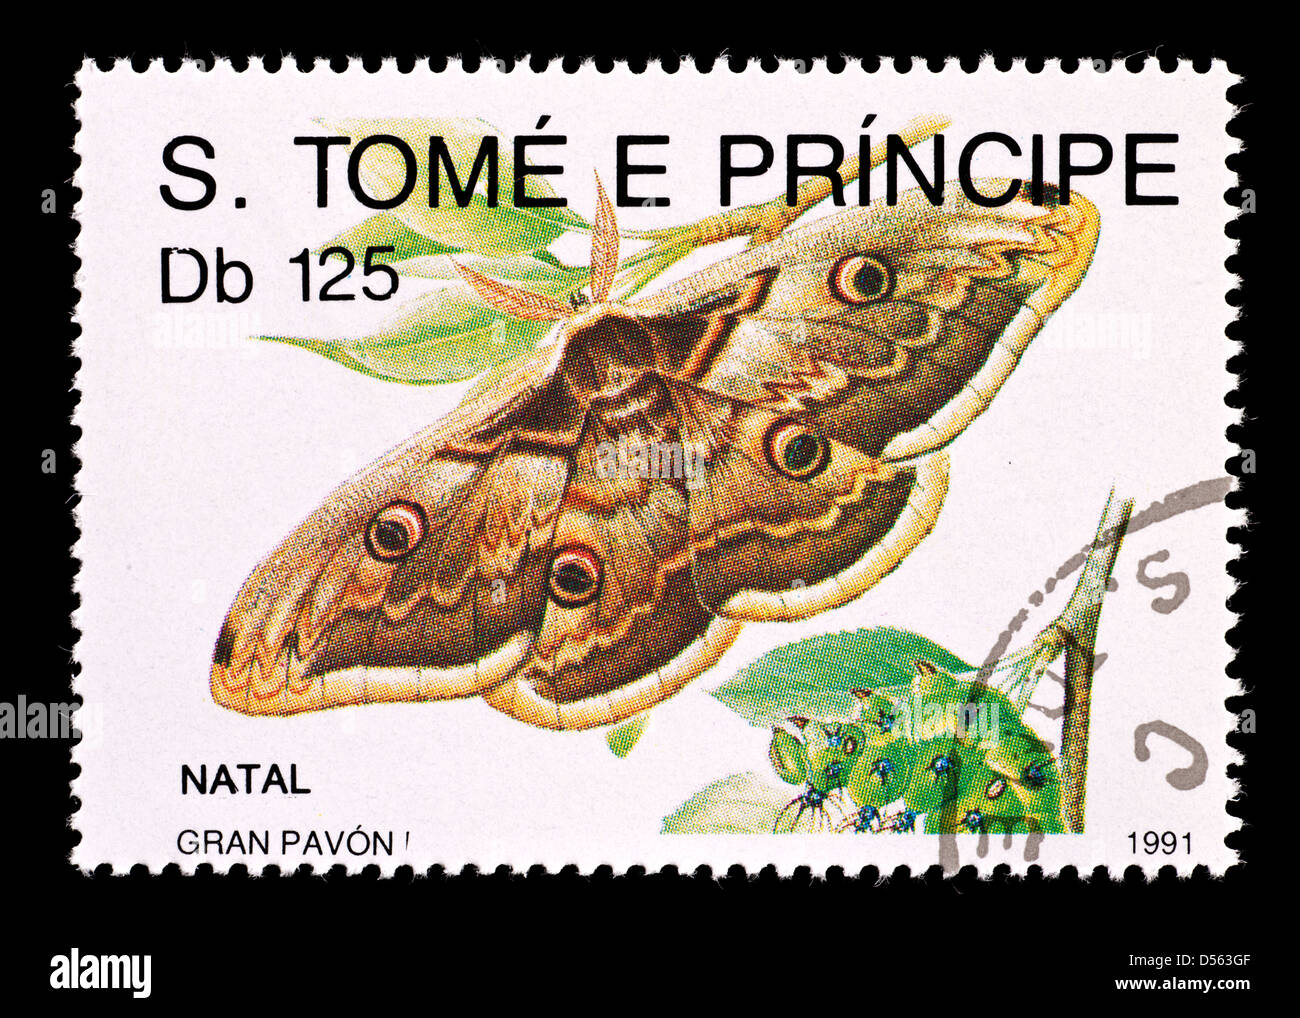 Postage stamp from Saint Thomas and Prince Islands depicting the giant peacock moth (Saturnia pyri) Stock Photo